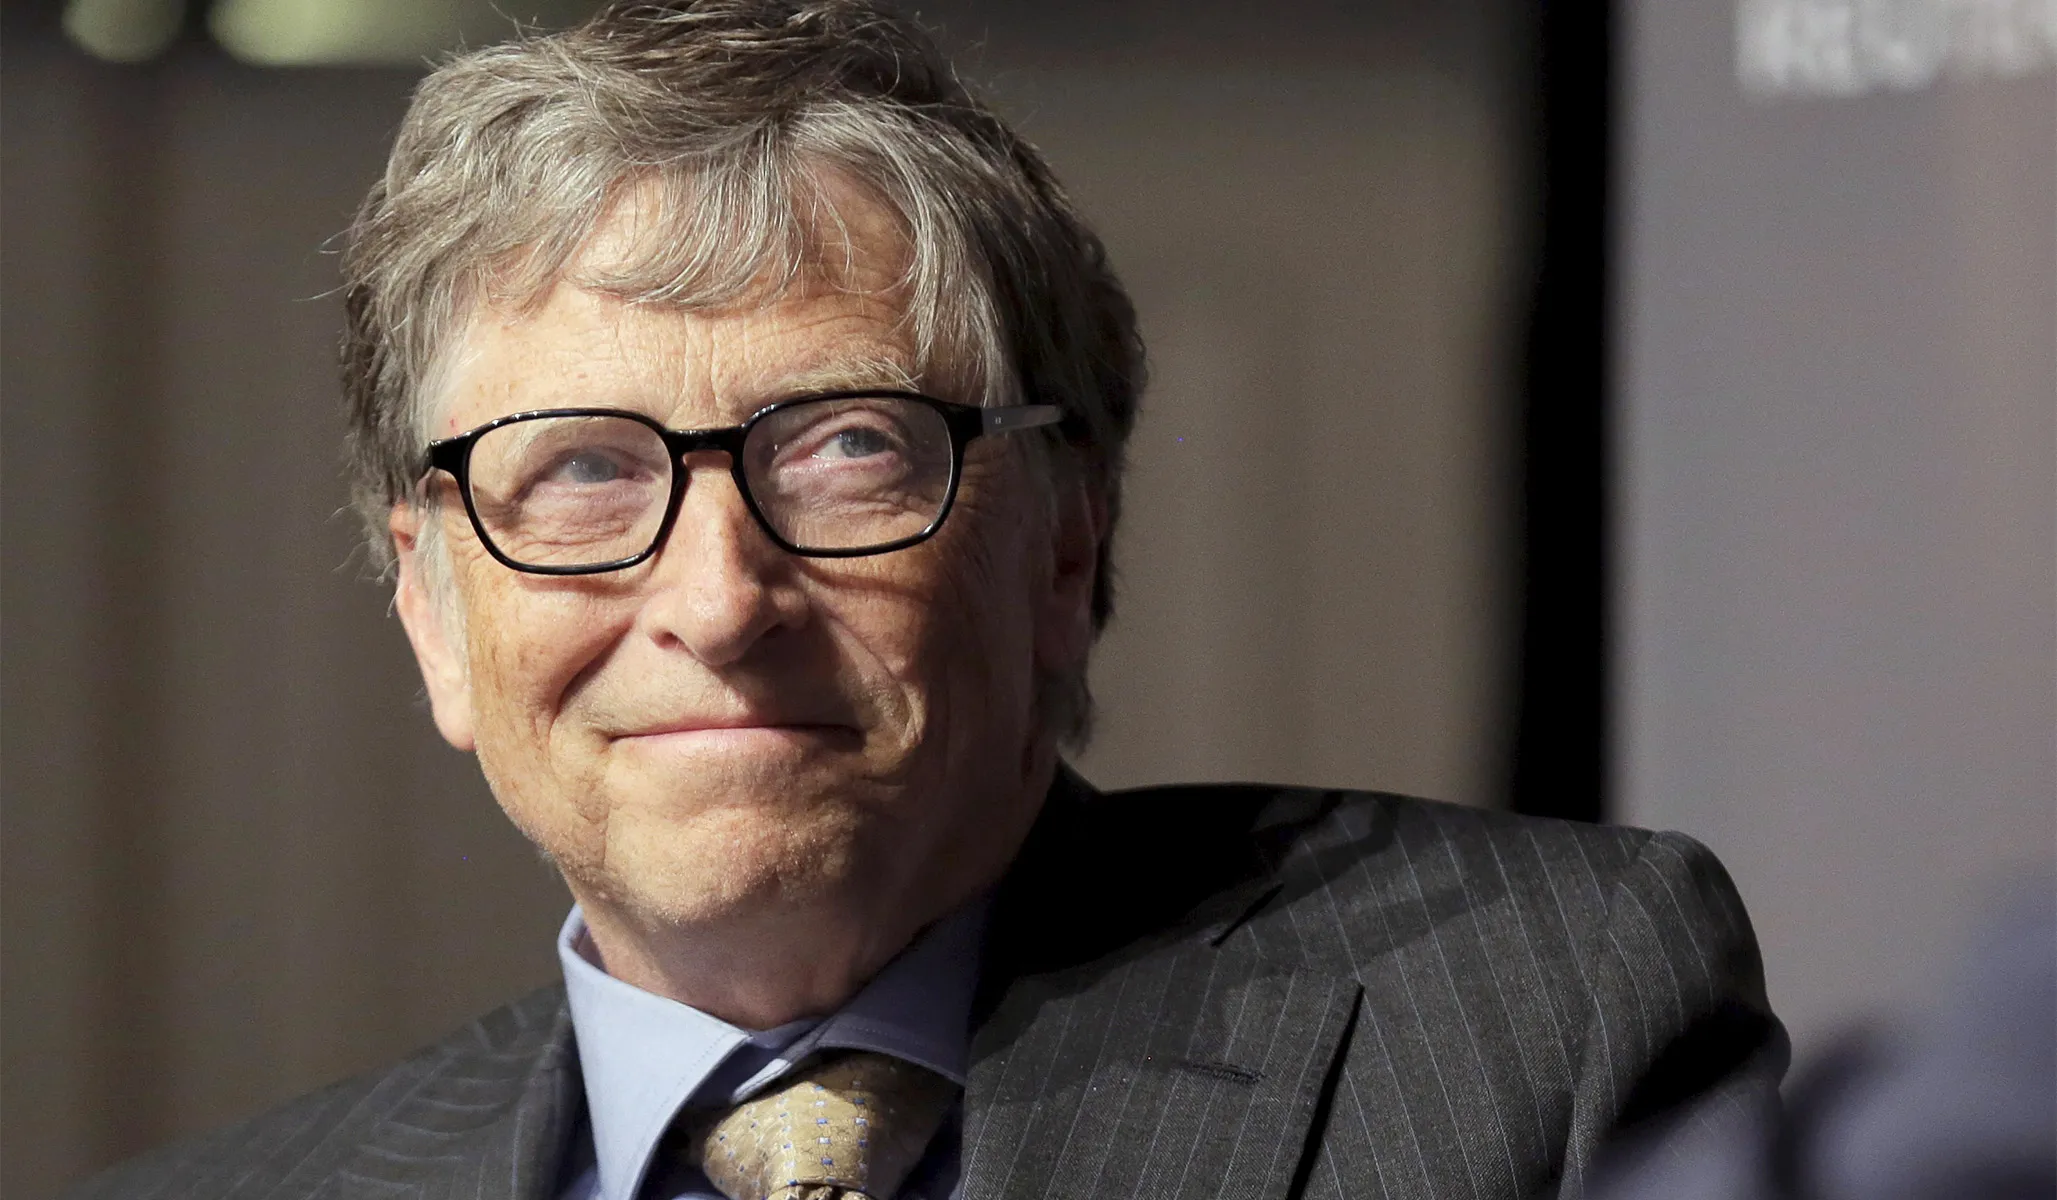 Bill Gates will Write his own Biography “My Beginnings”